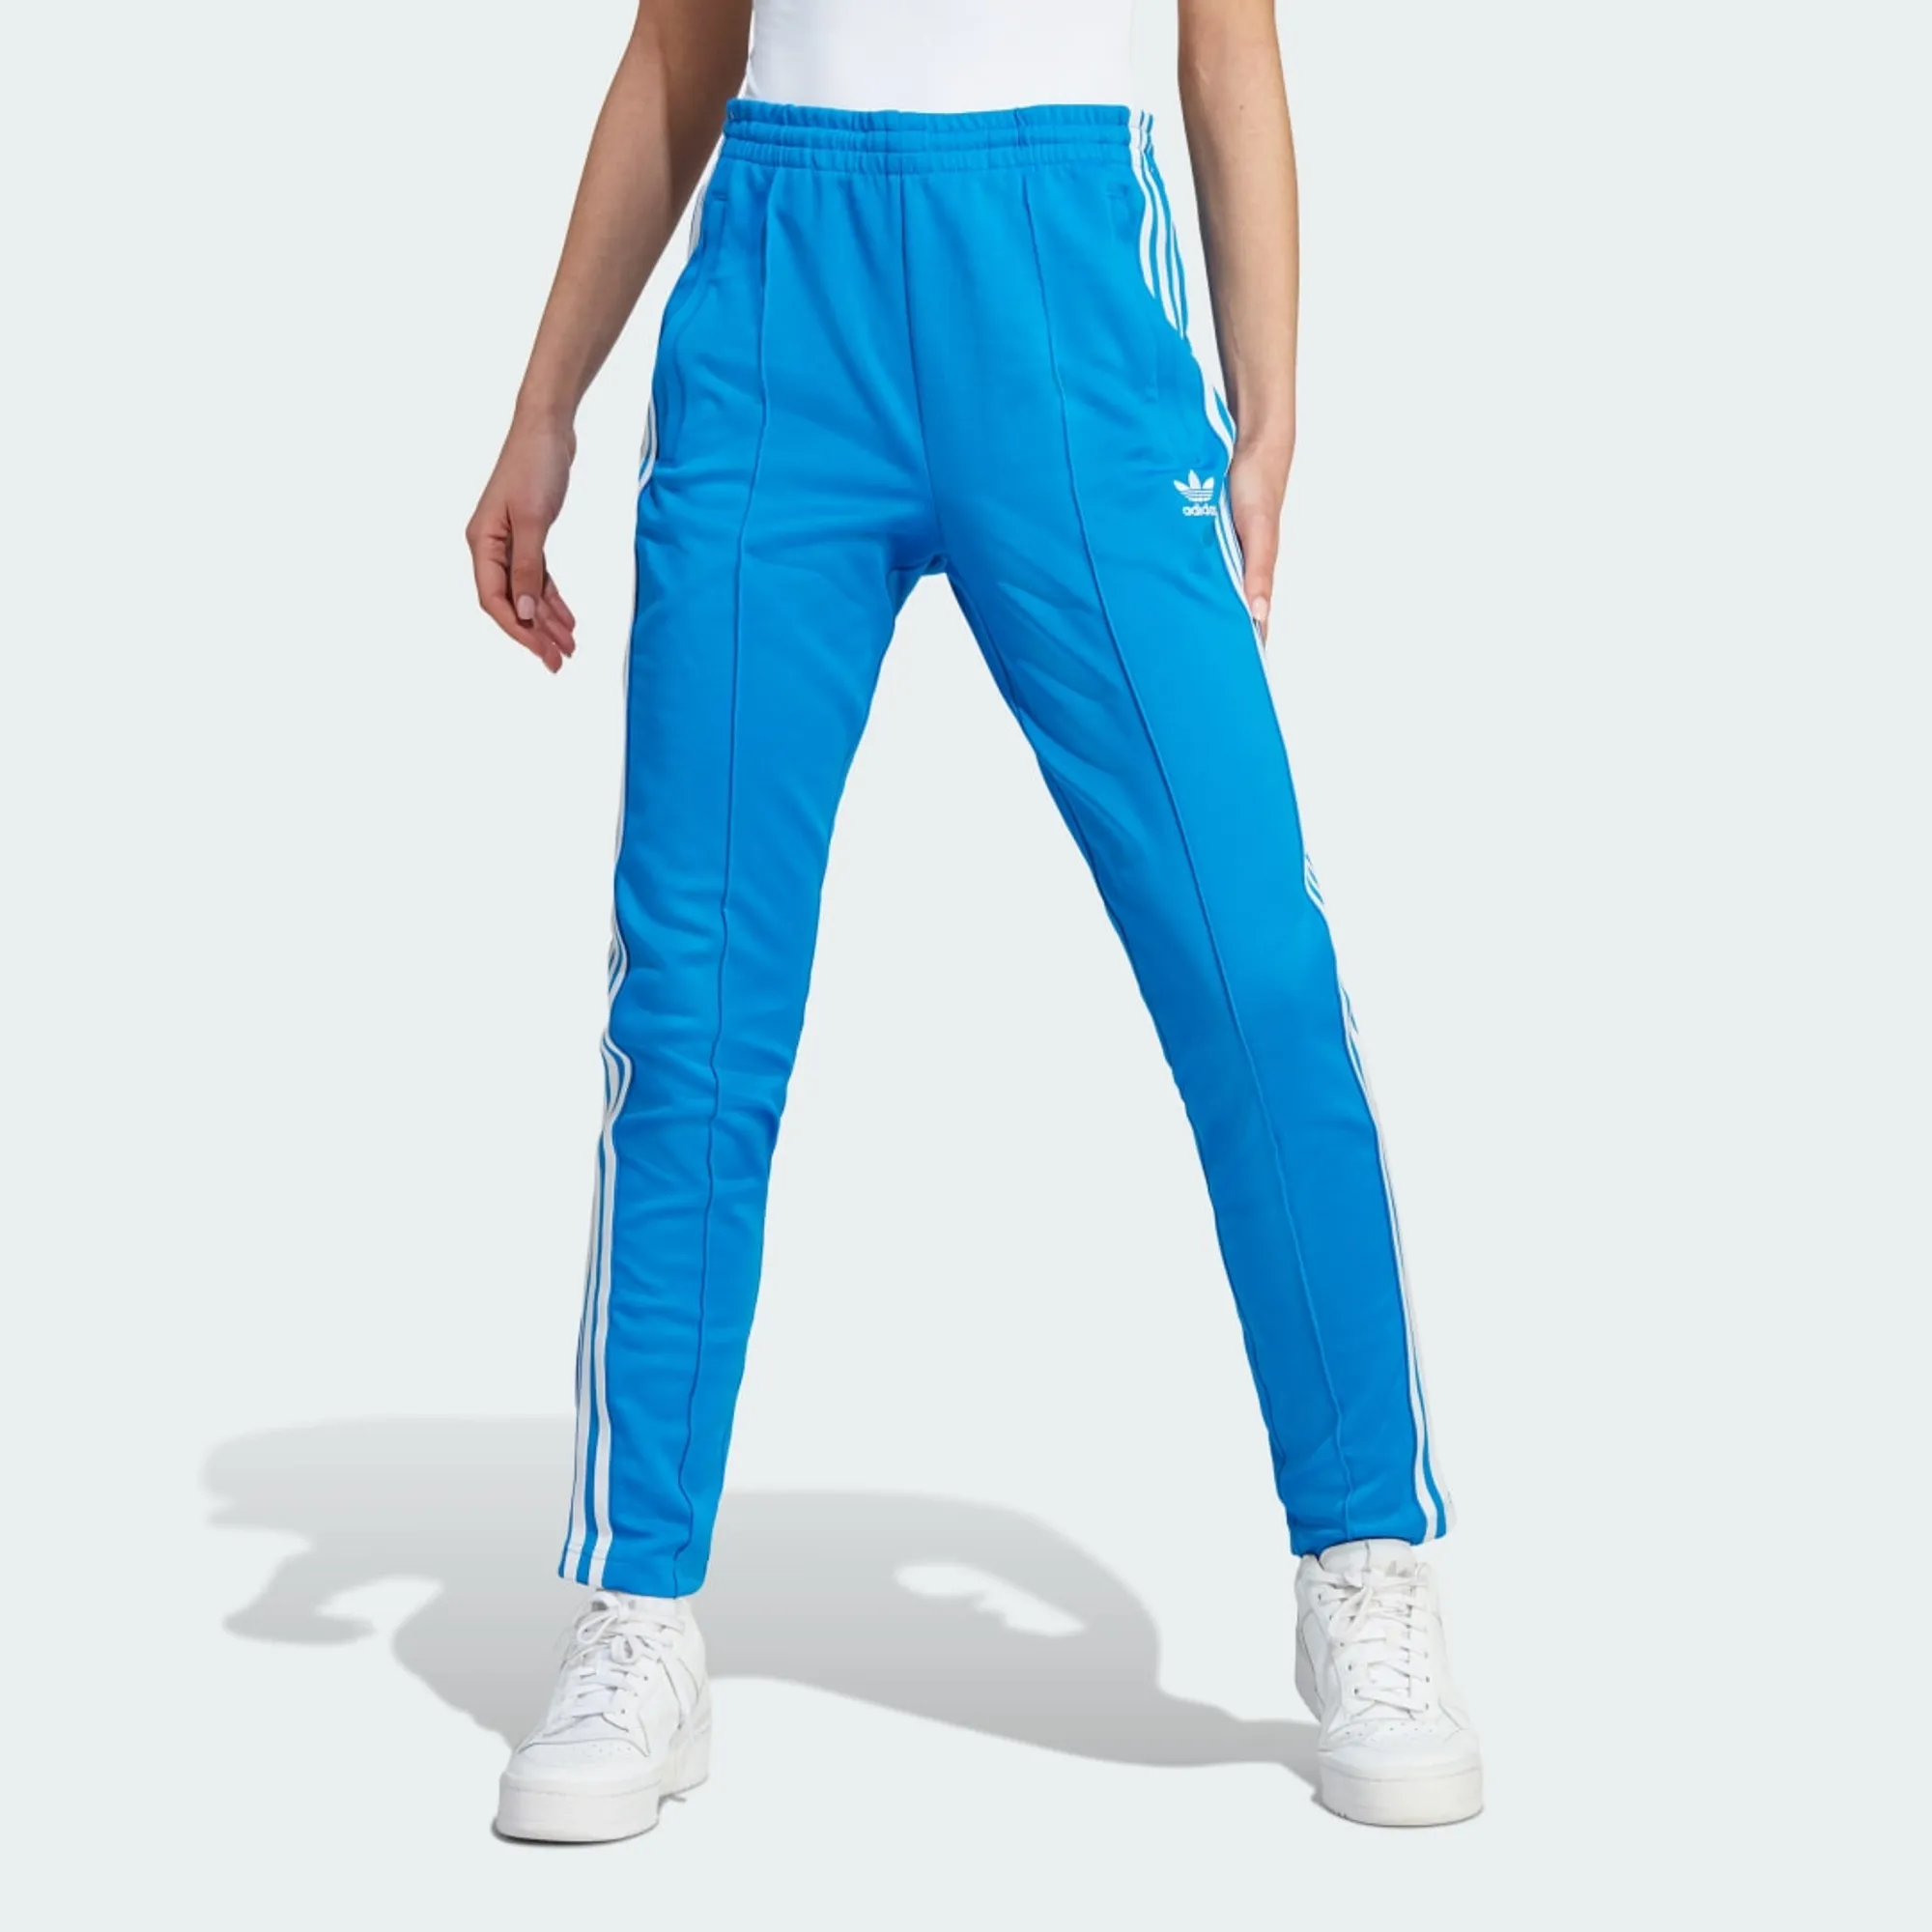 Adidas Originals Girls' Track Pants Kids' Tapered Cuffed Athletic Training  | Kingsway Mall